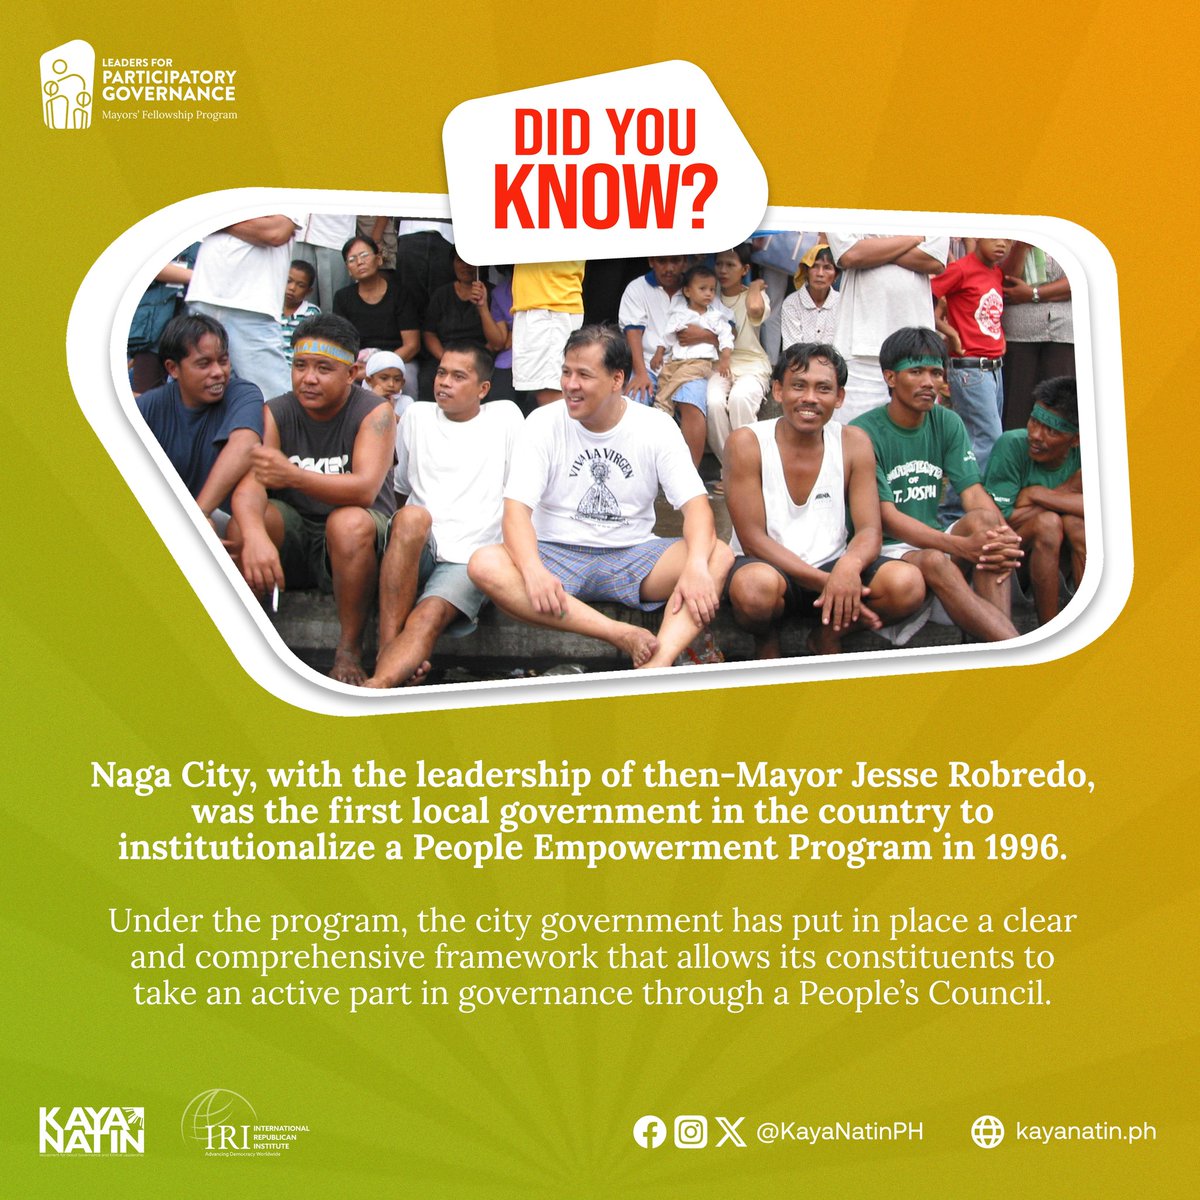 Did you know? It was then-Naga City Mayor Jesse Robredo who first established a People's Council in a local government in 1996. Through this, the city government allowed its constituents to take an active part in governance. #LeadGov #CitizenParticipation